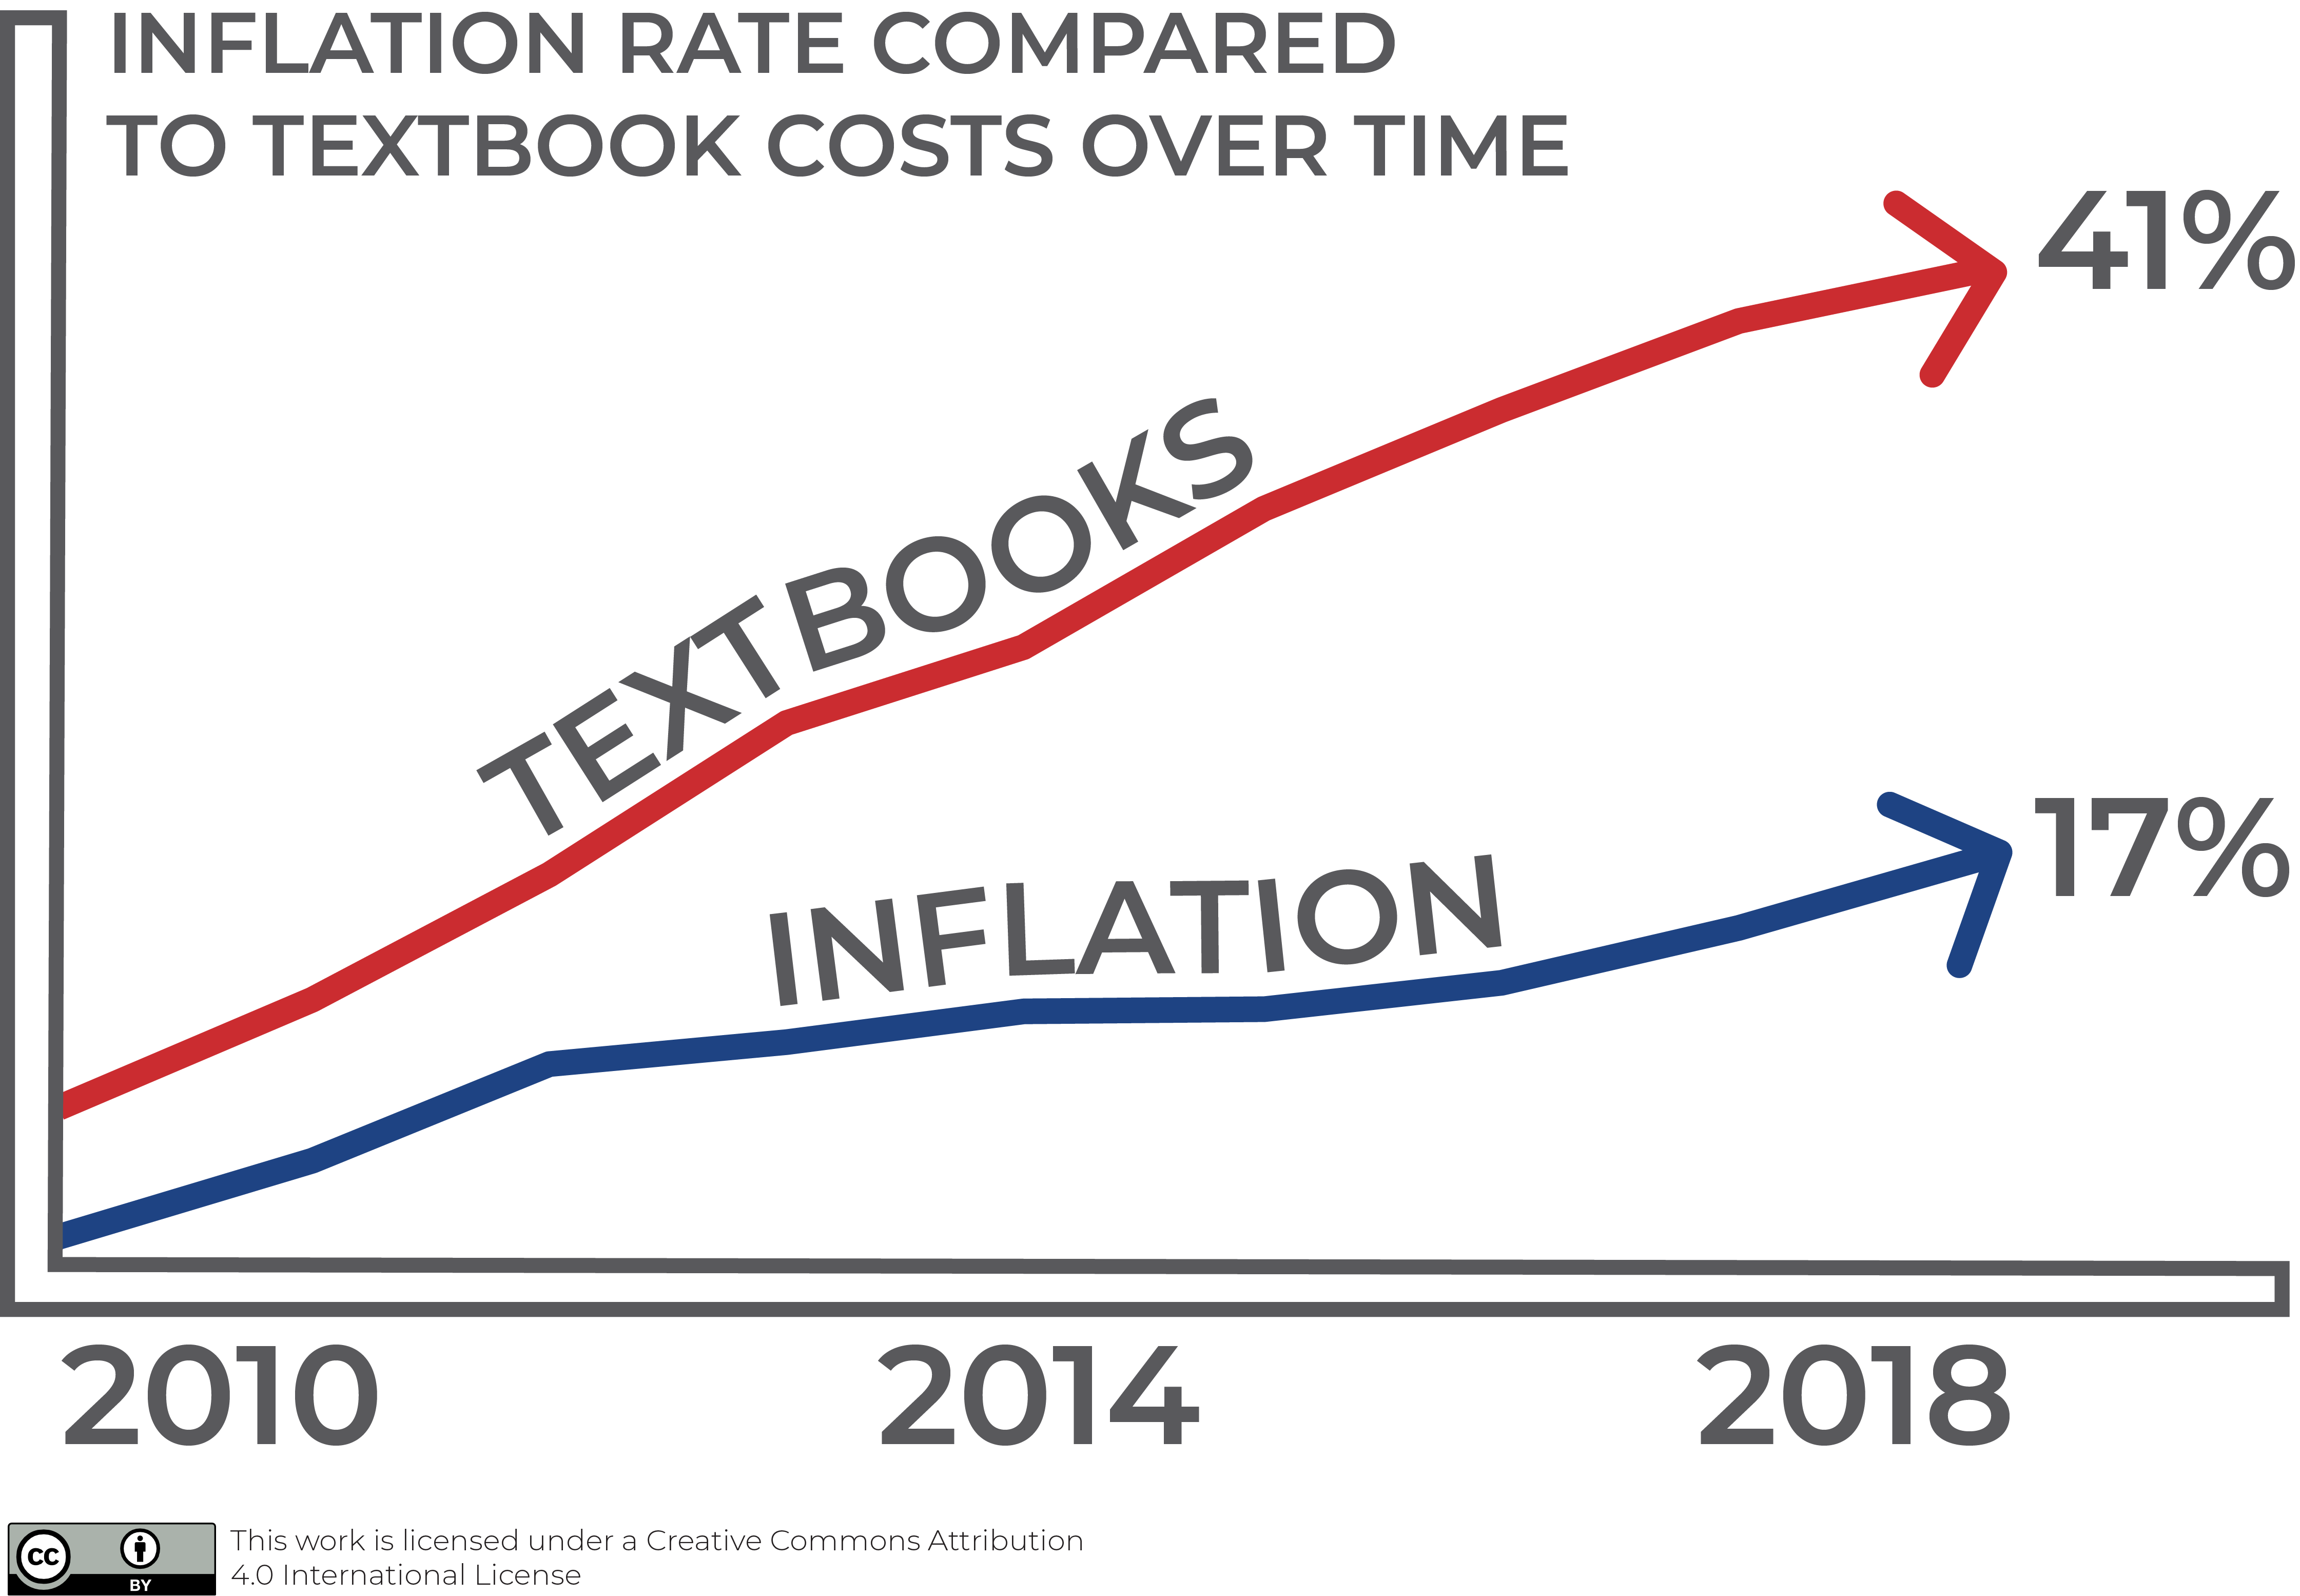 inflation rate compared to textbooks over the period of 2010-2018. Two upward trend lines, one for texbooks showing 41% increase and one for inflation showing 17% increase.